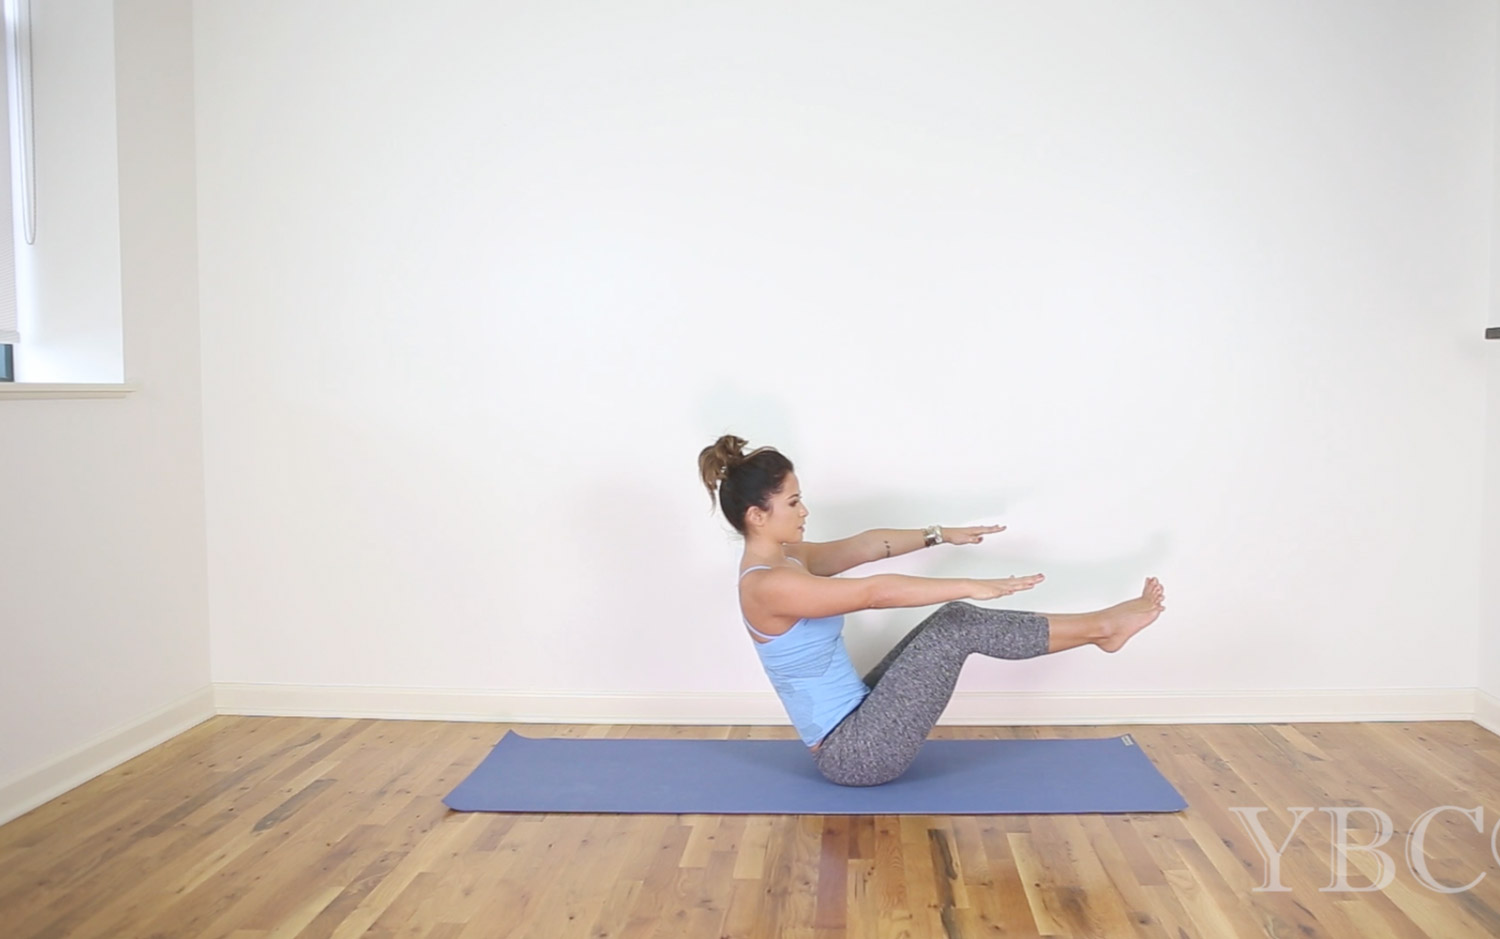 20 Minute Yoga for Core Strength Video — YOGABYCANDACE